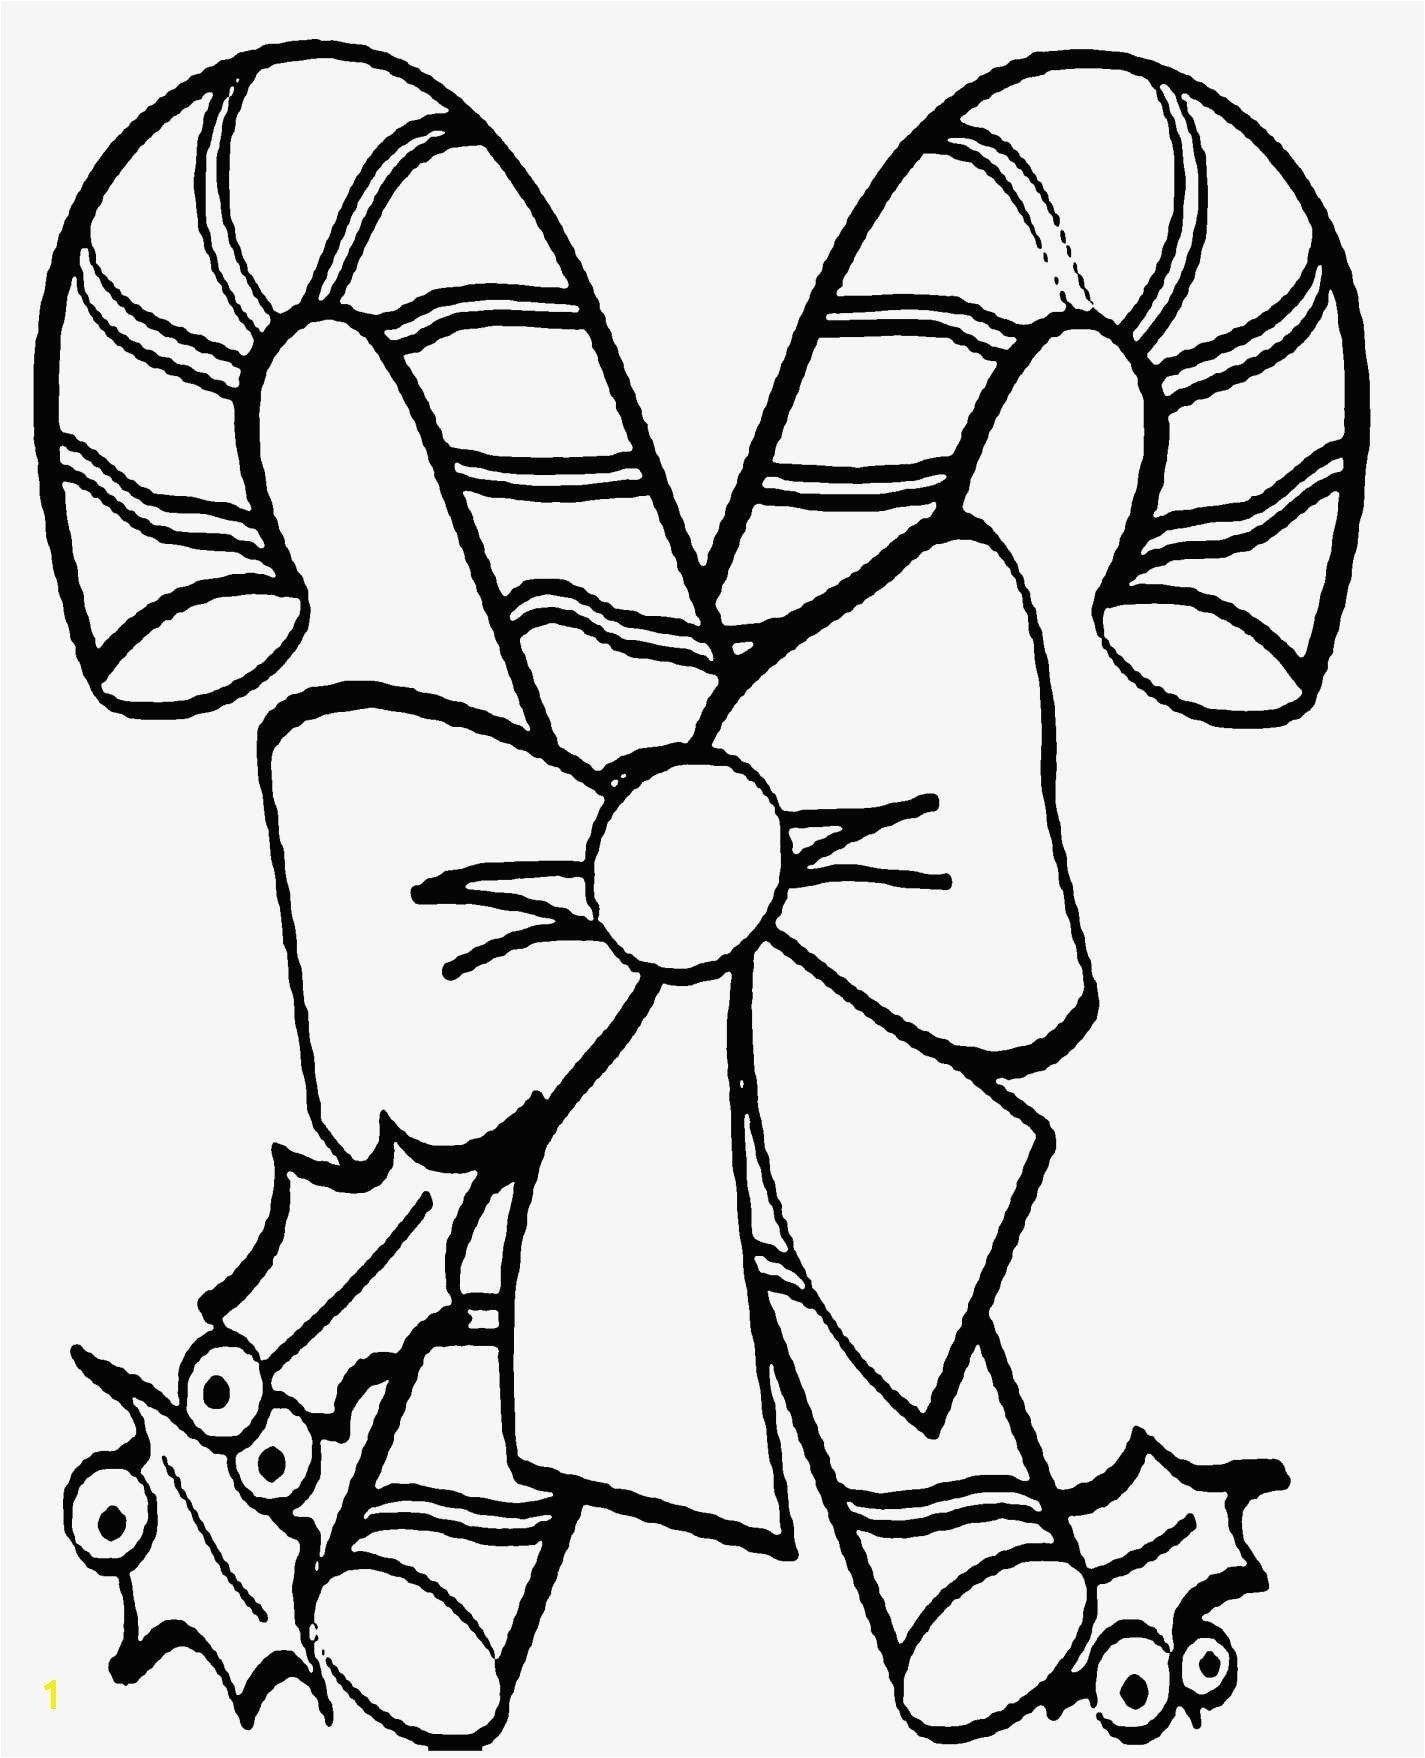 Printable Christmas Coloring Pages Candy Canes Candy Cane Coloring Pages New Hello Kitty Cartoon Coloring Page